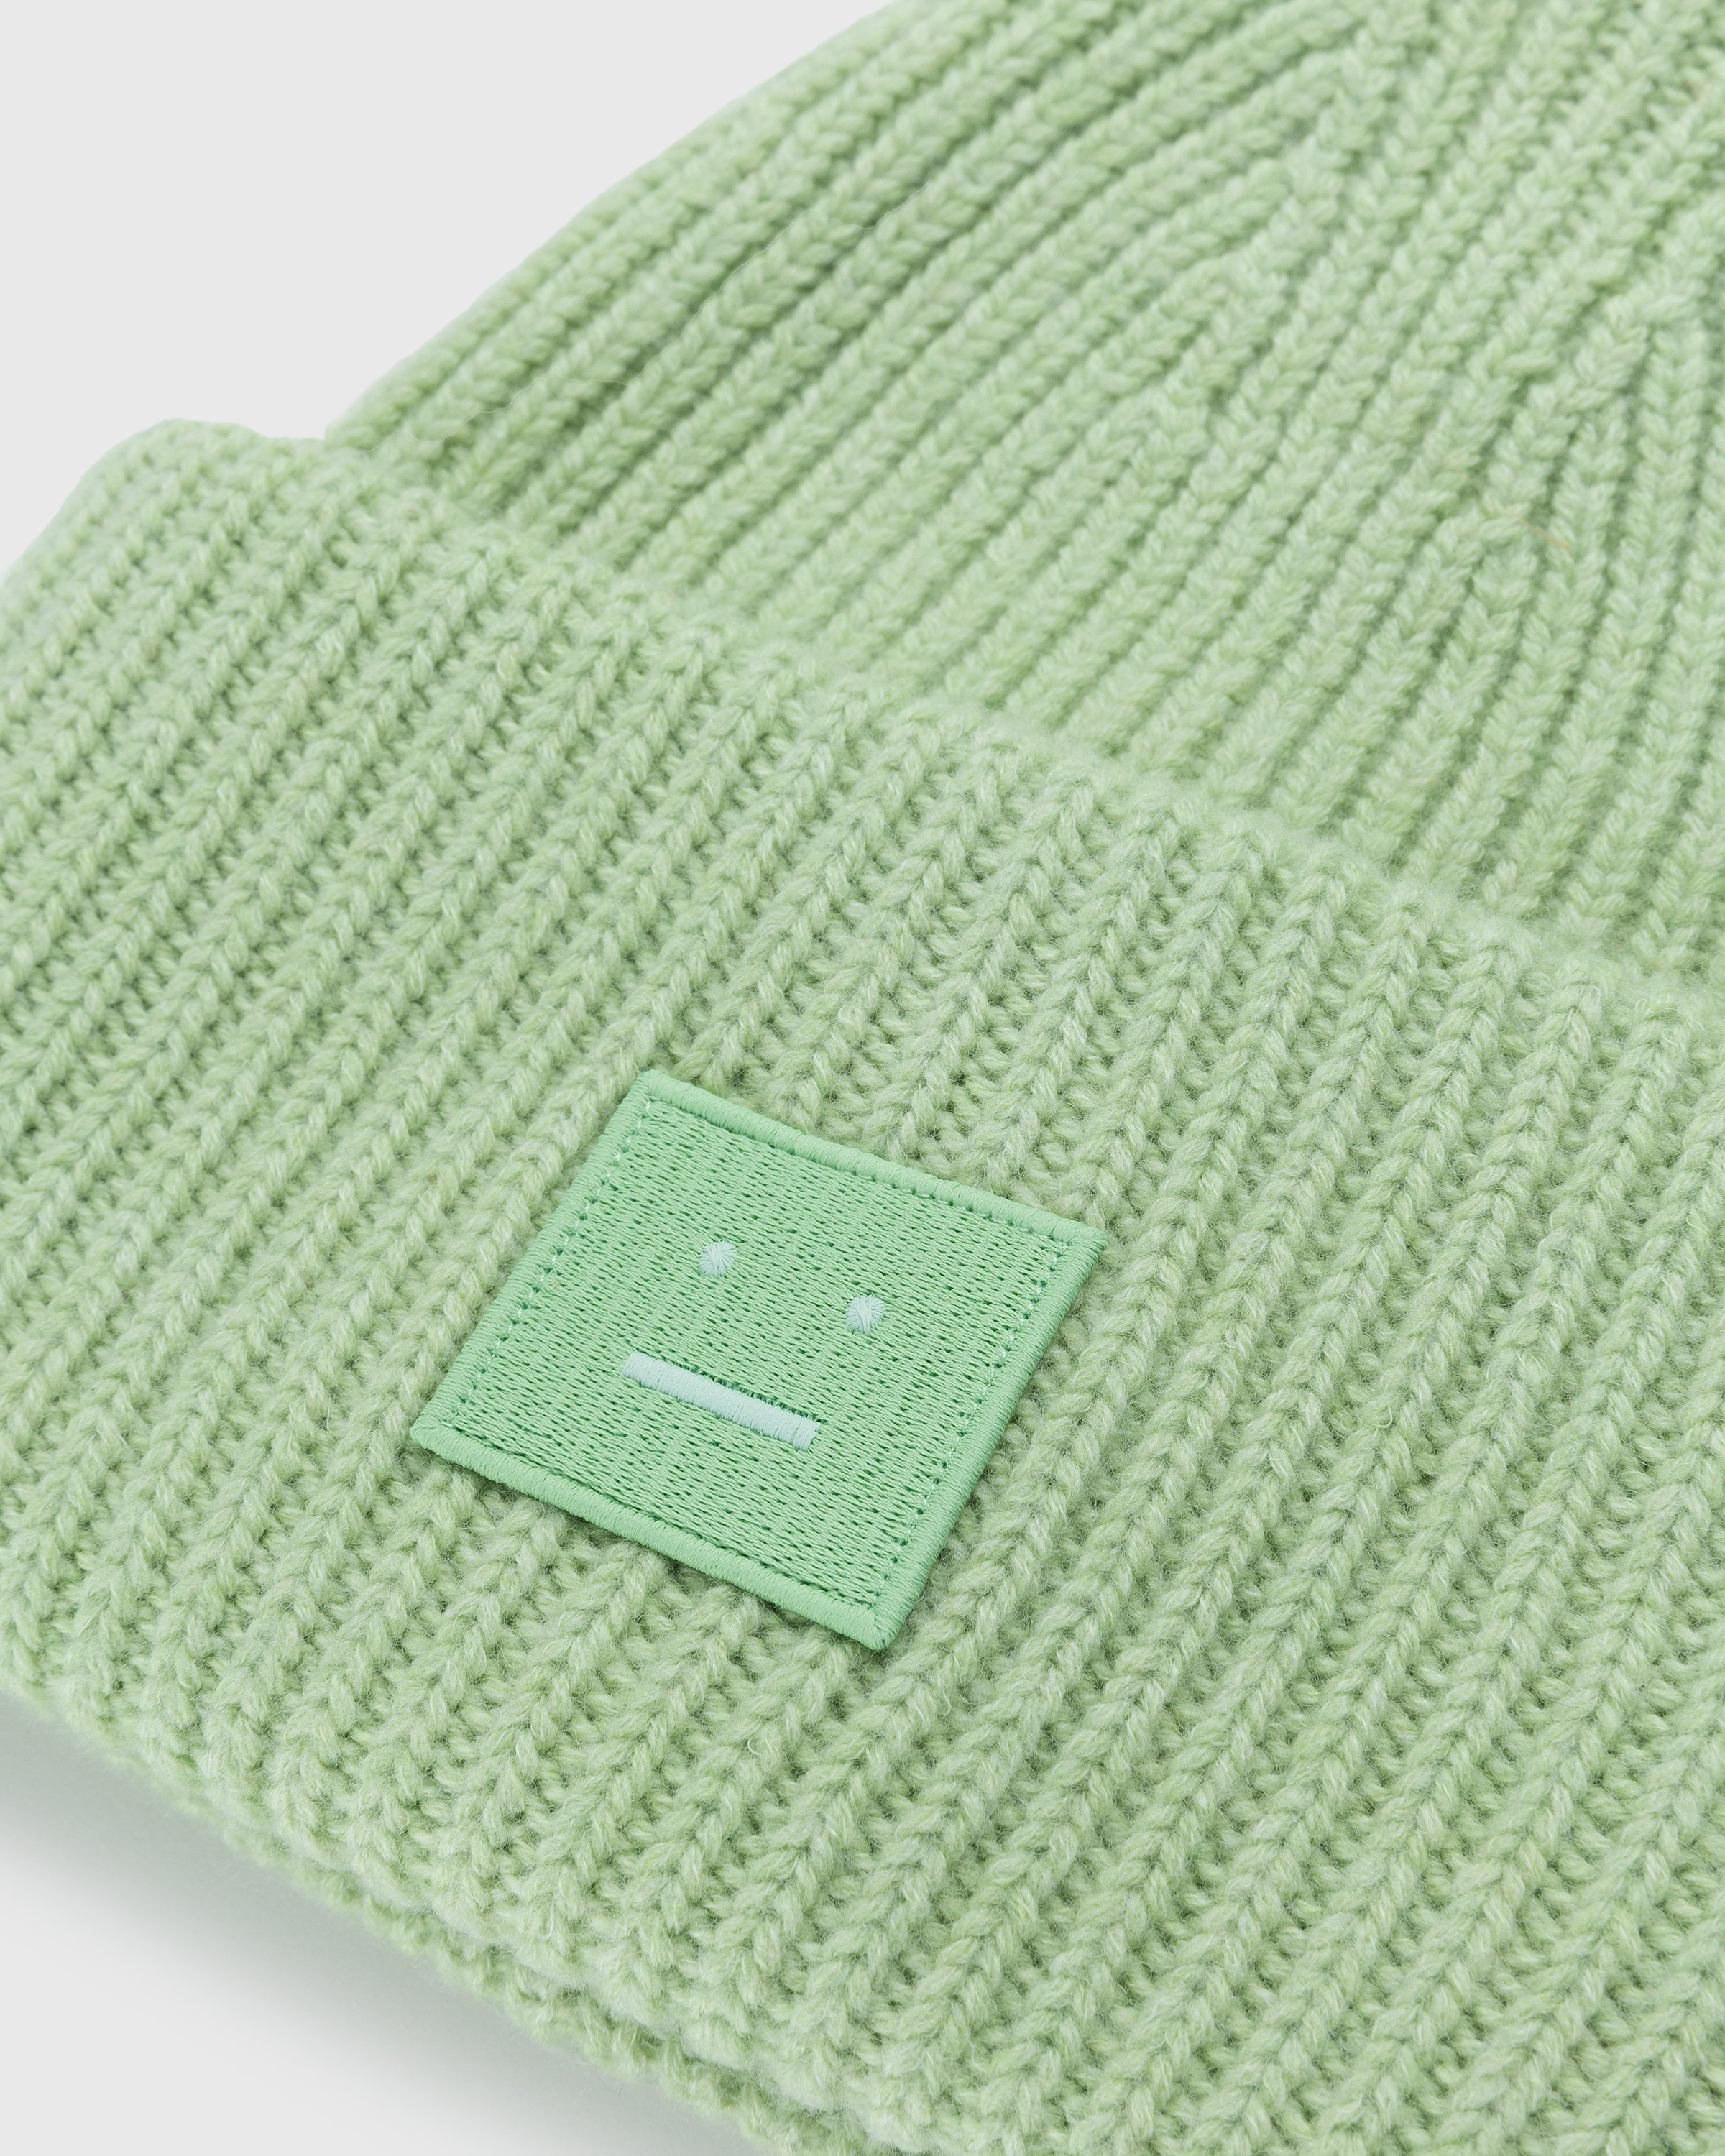 Acne Studios - Knit Face Patch Beanie Pale Green - Accessories - Green - Image 3